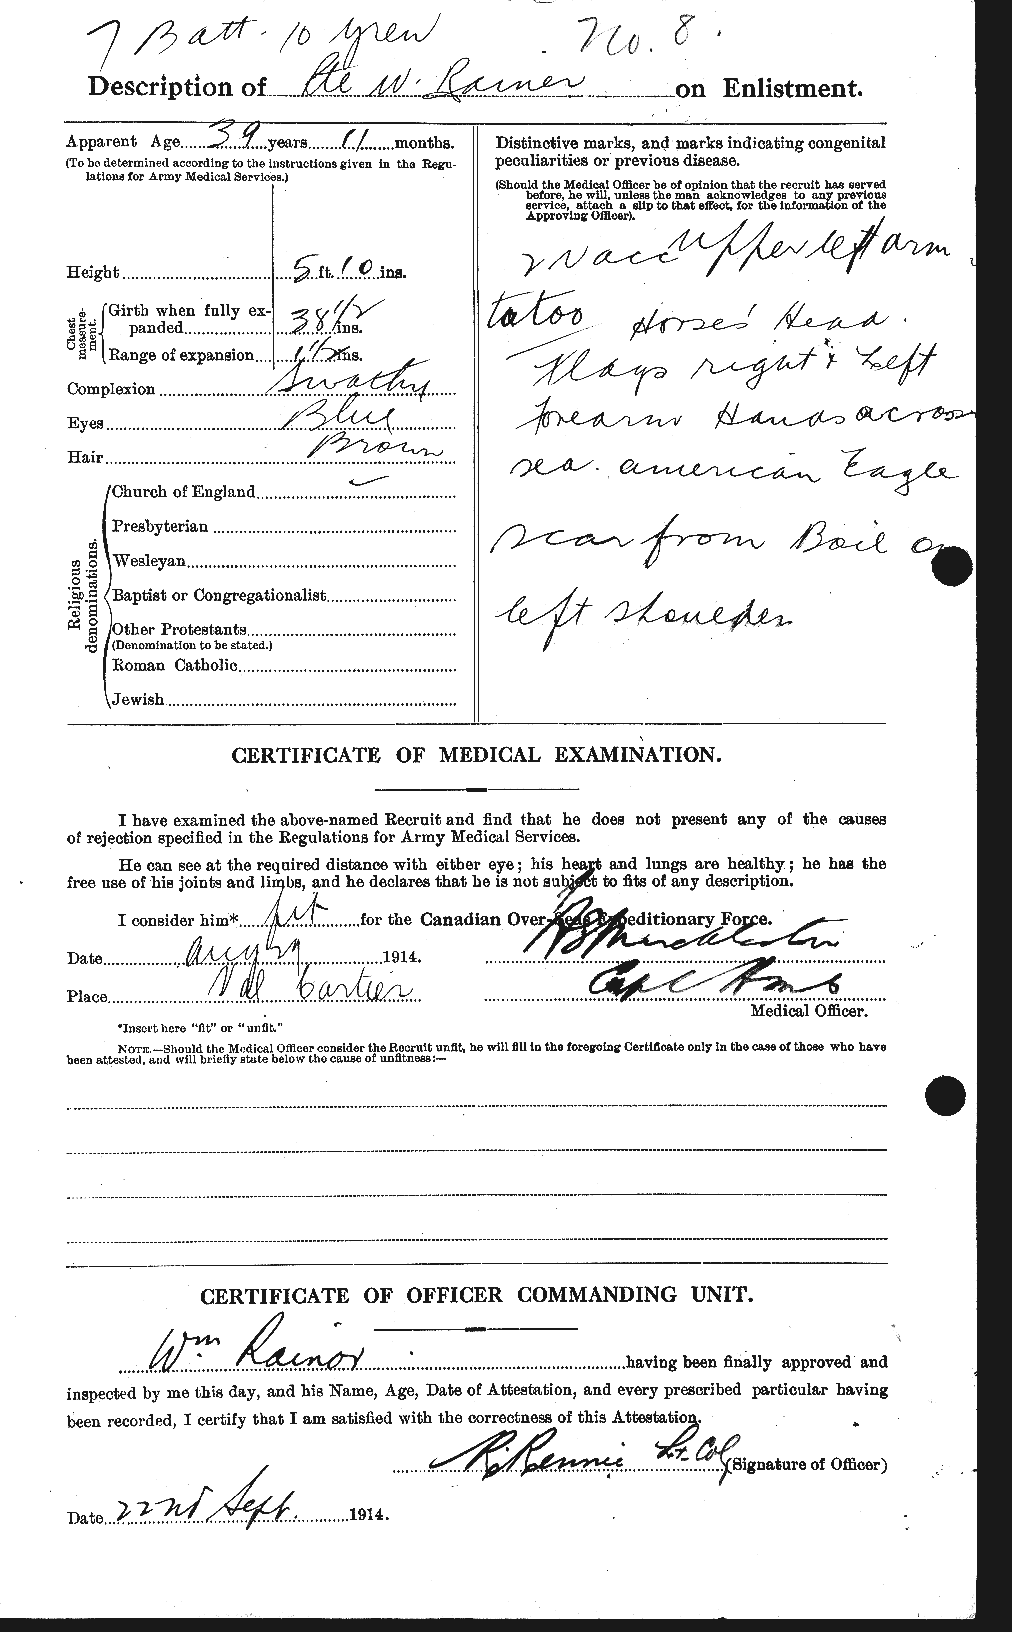 Personnel Records of the First World War - CEF 593229b